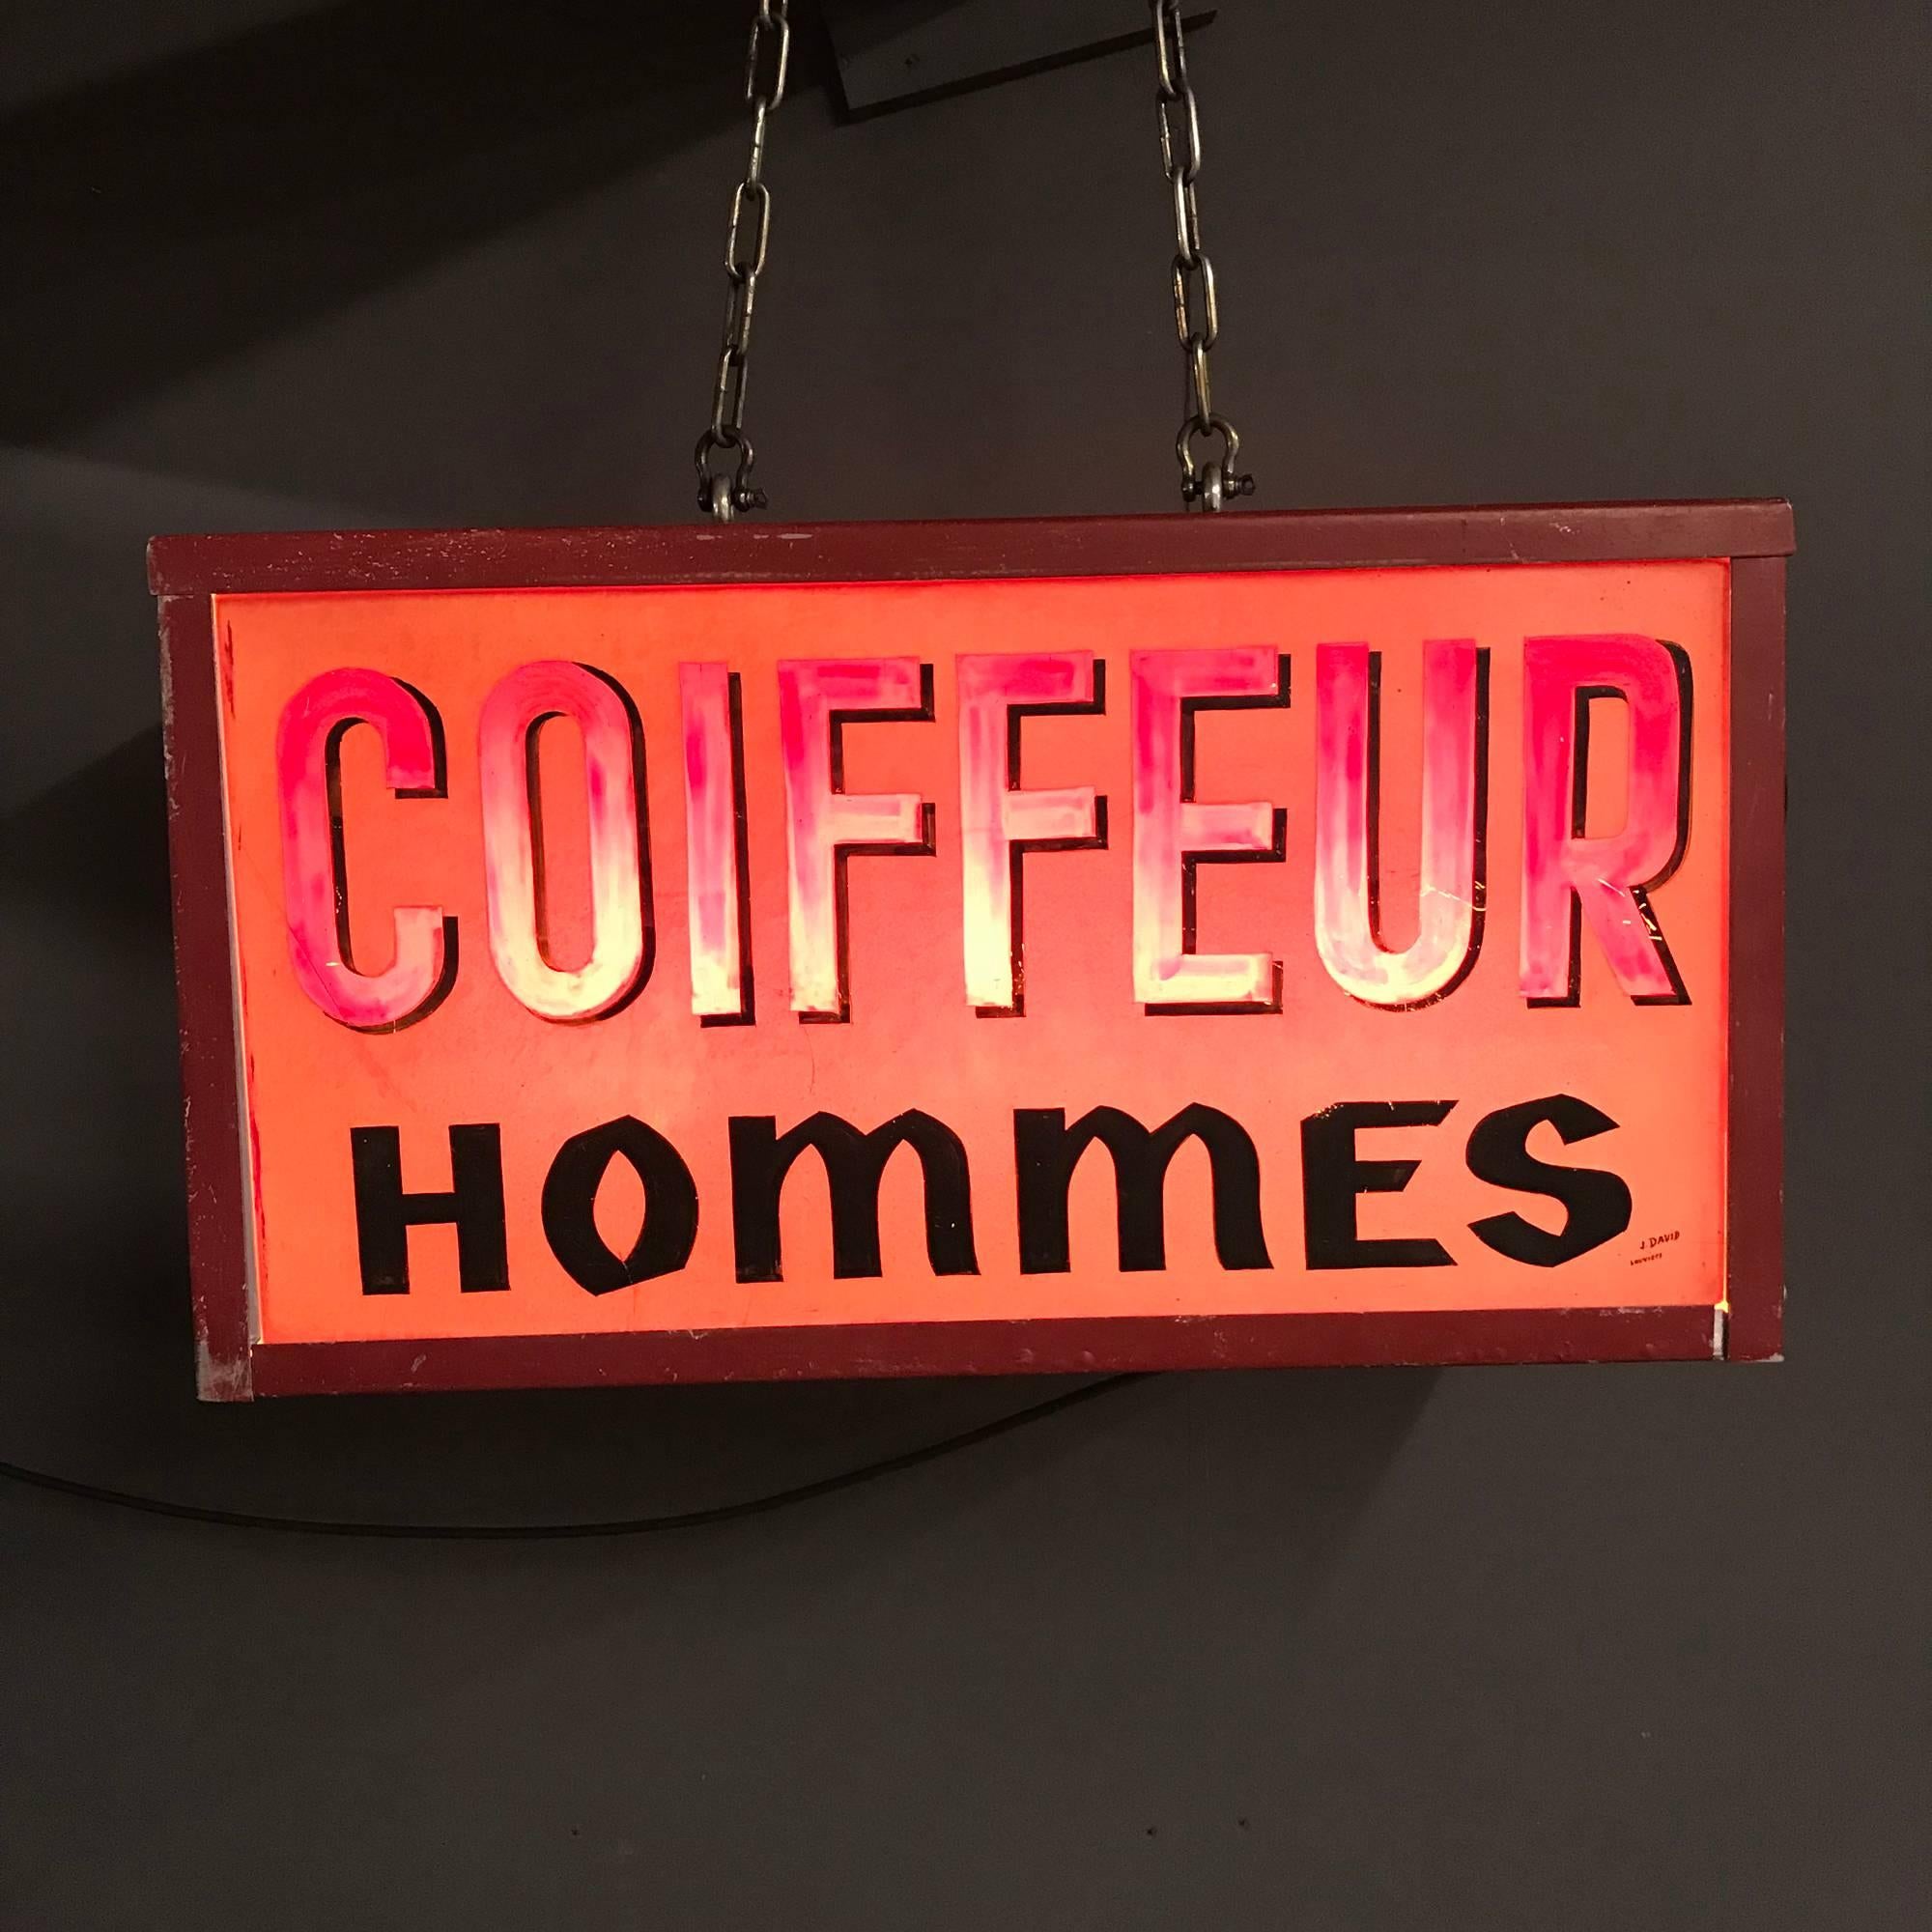 Vintage double sided barbershop sign from France. “Coiffeur Homme” Made by J. David, in Louviers France during the early 20th century. The aluminium frame has been restored and the lighting is converted to E27 with three porcelain sockets and an EU